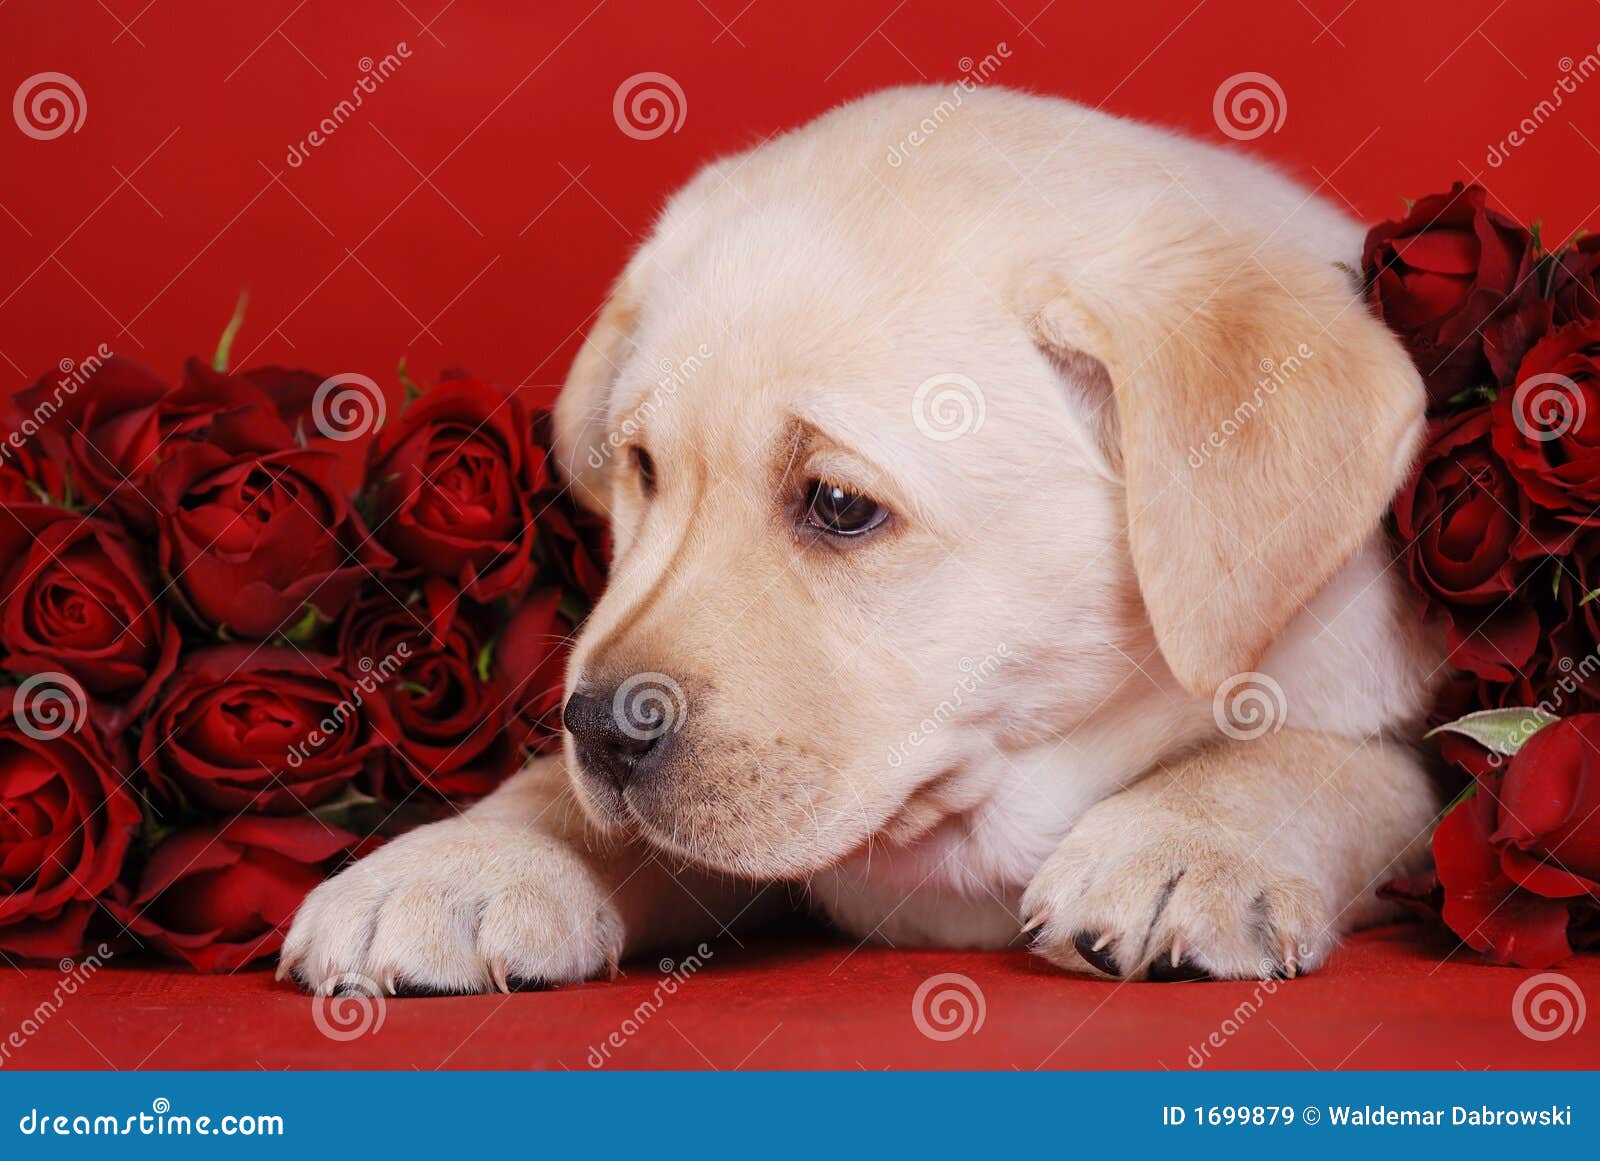 Puppy and roses stock image. Image of emotion, friendship - 16998791300 x 960